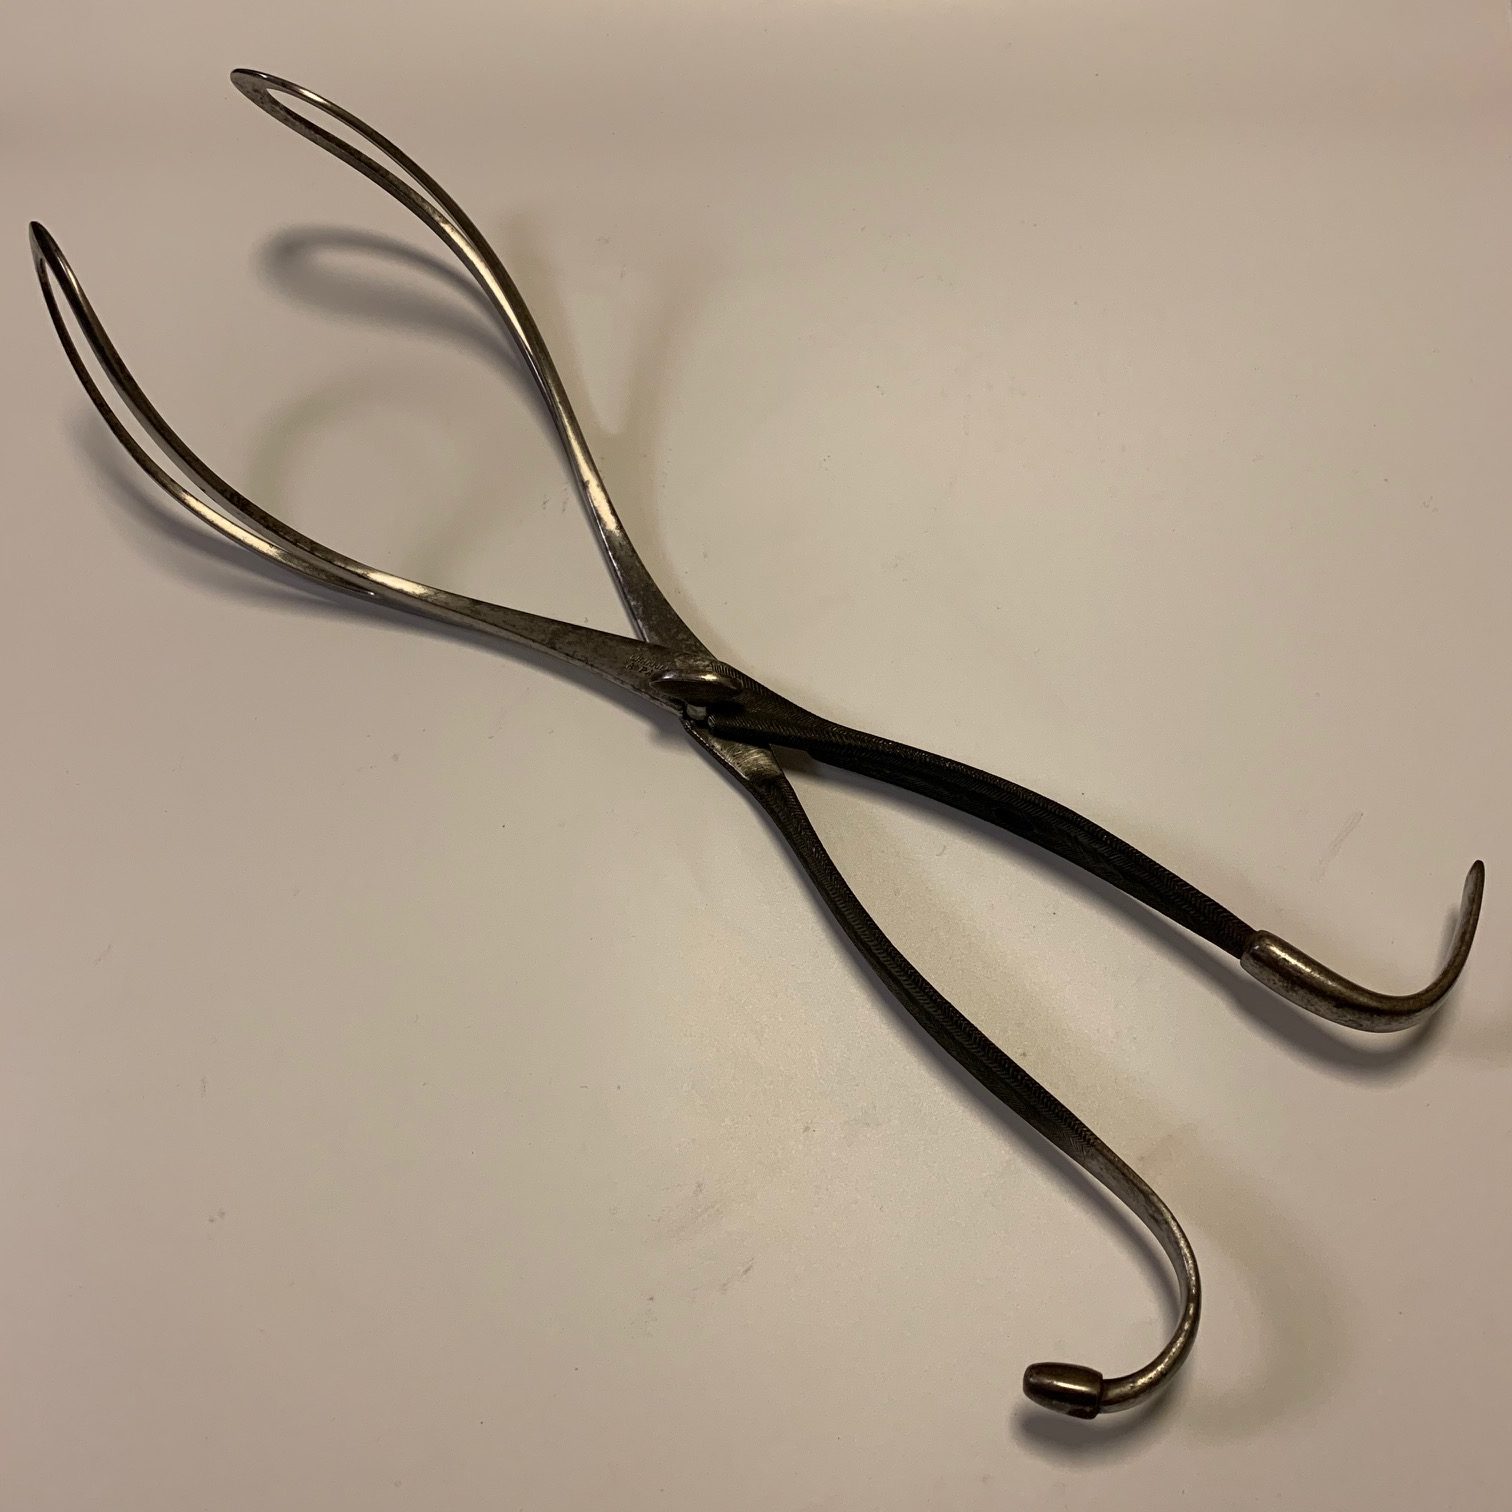 Antique obstetrical forceps by “Charriere a Paris”